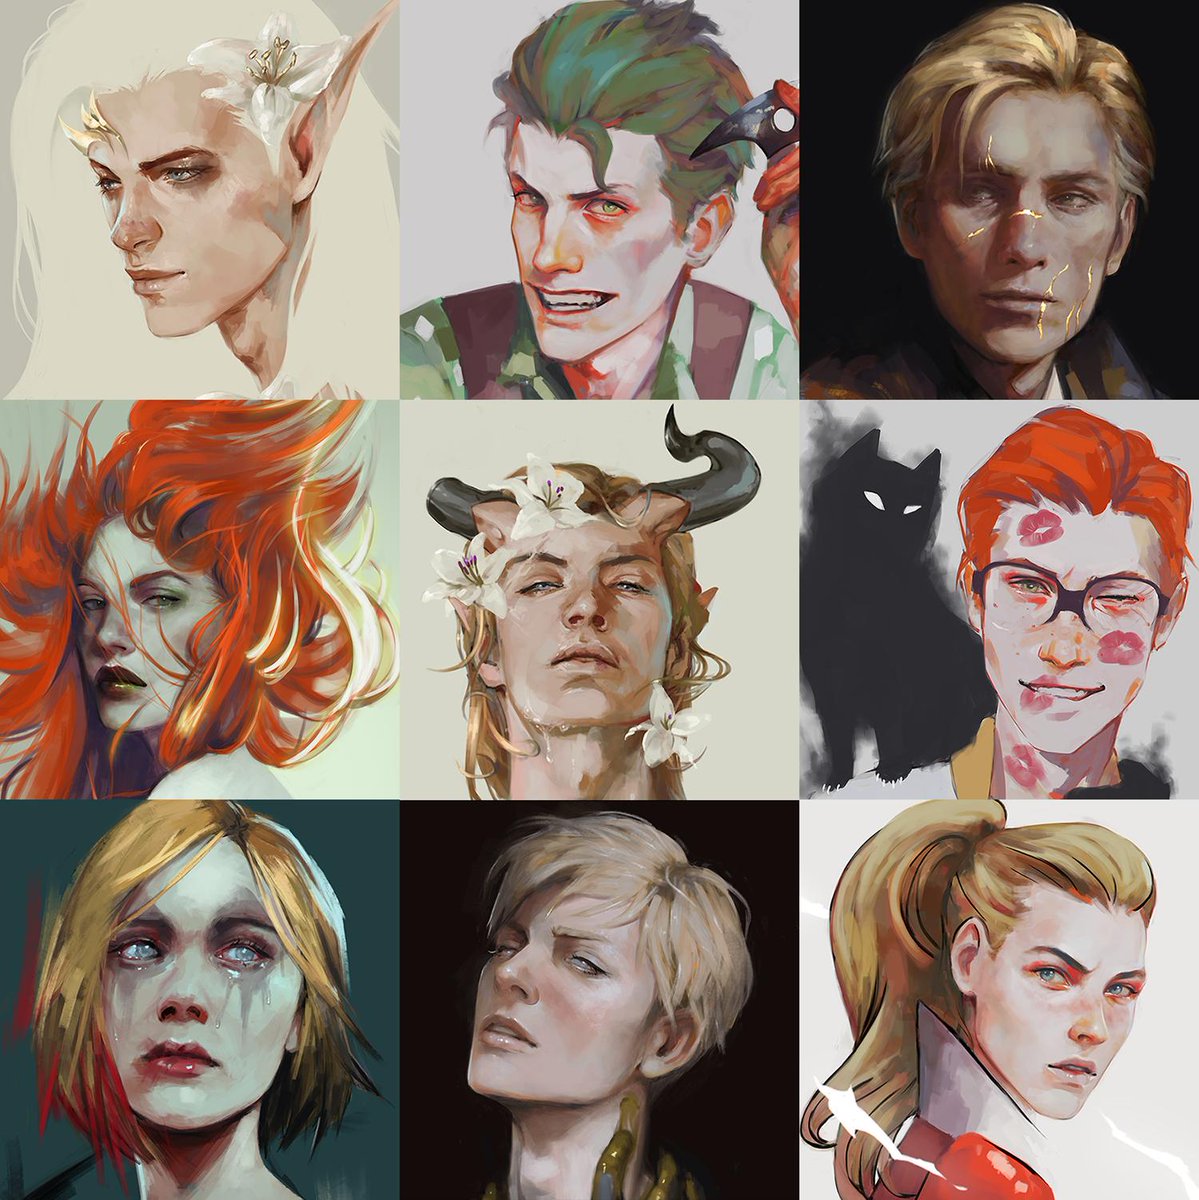 Late as always, but I do love drawing faces #FaceYourArt #faceyourartchallenge 